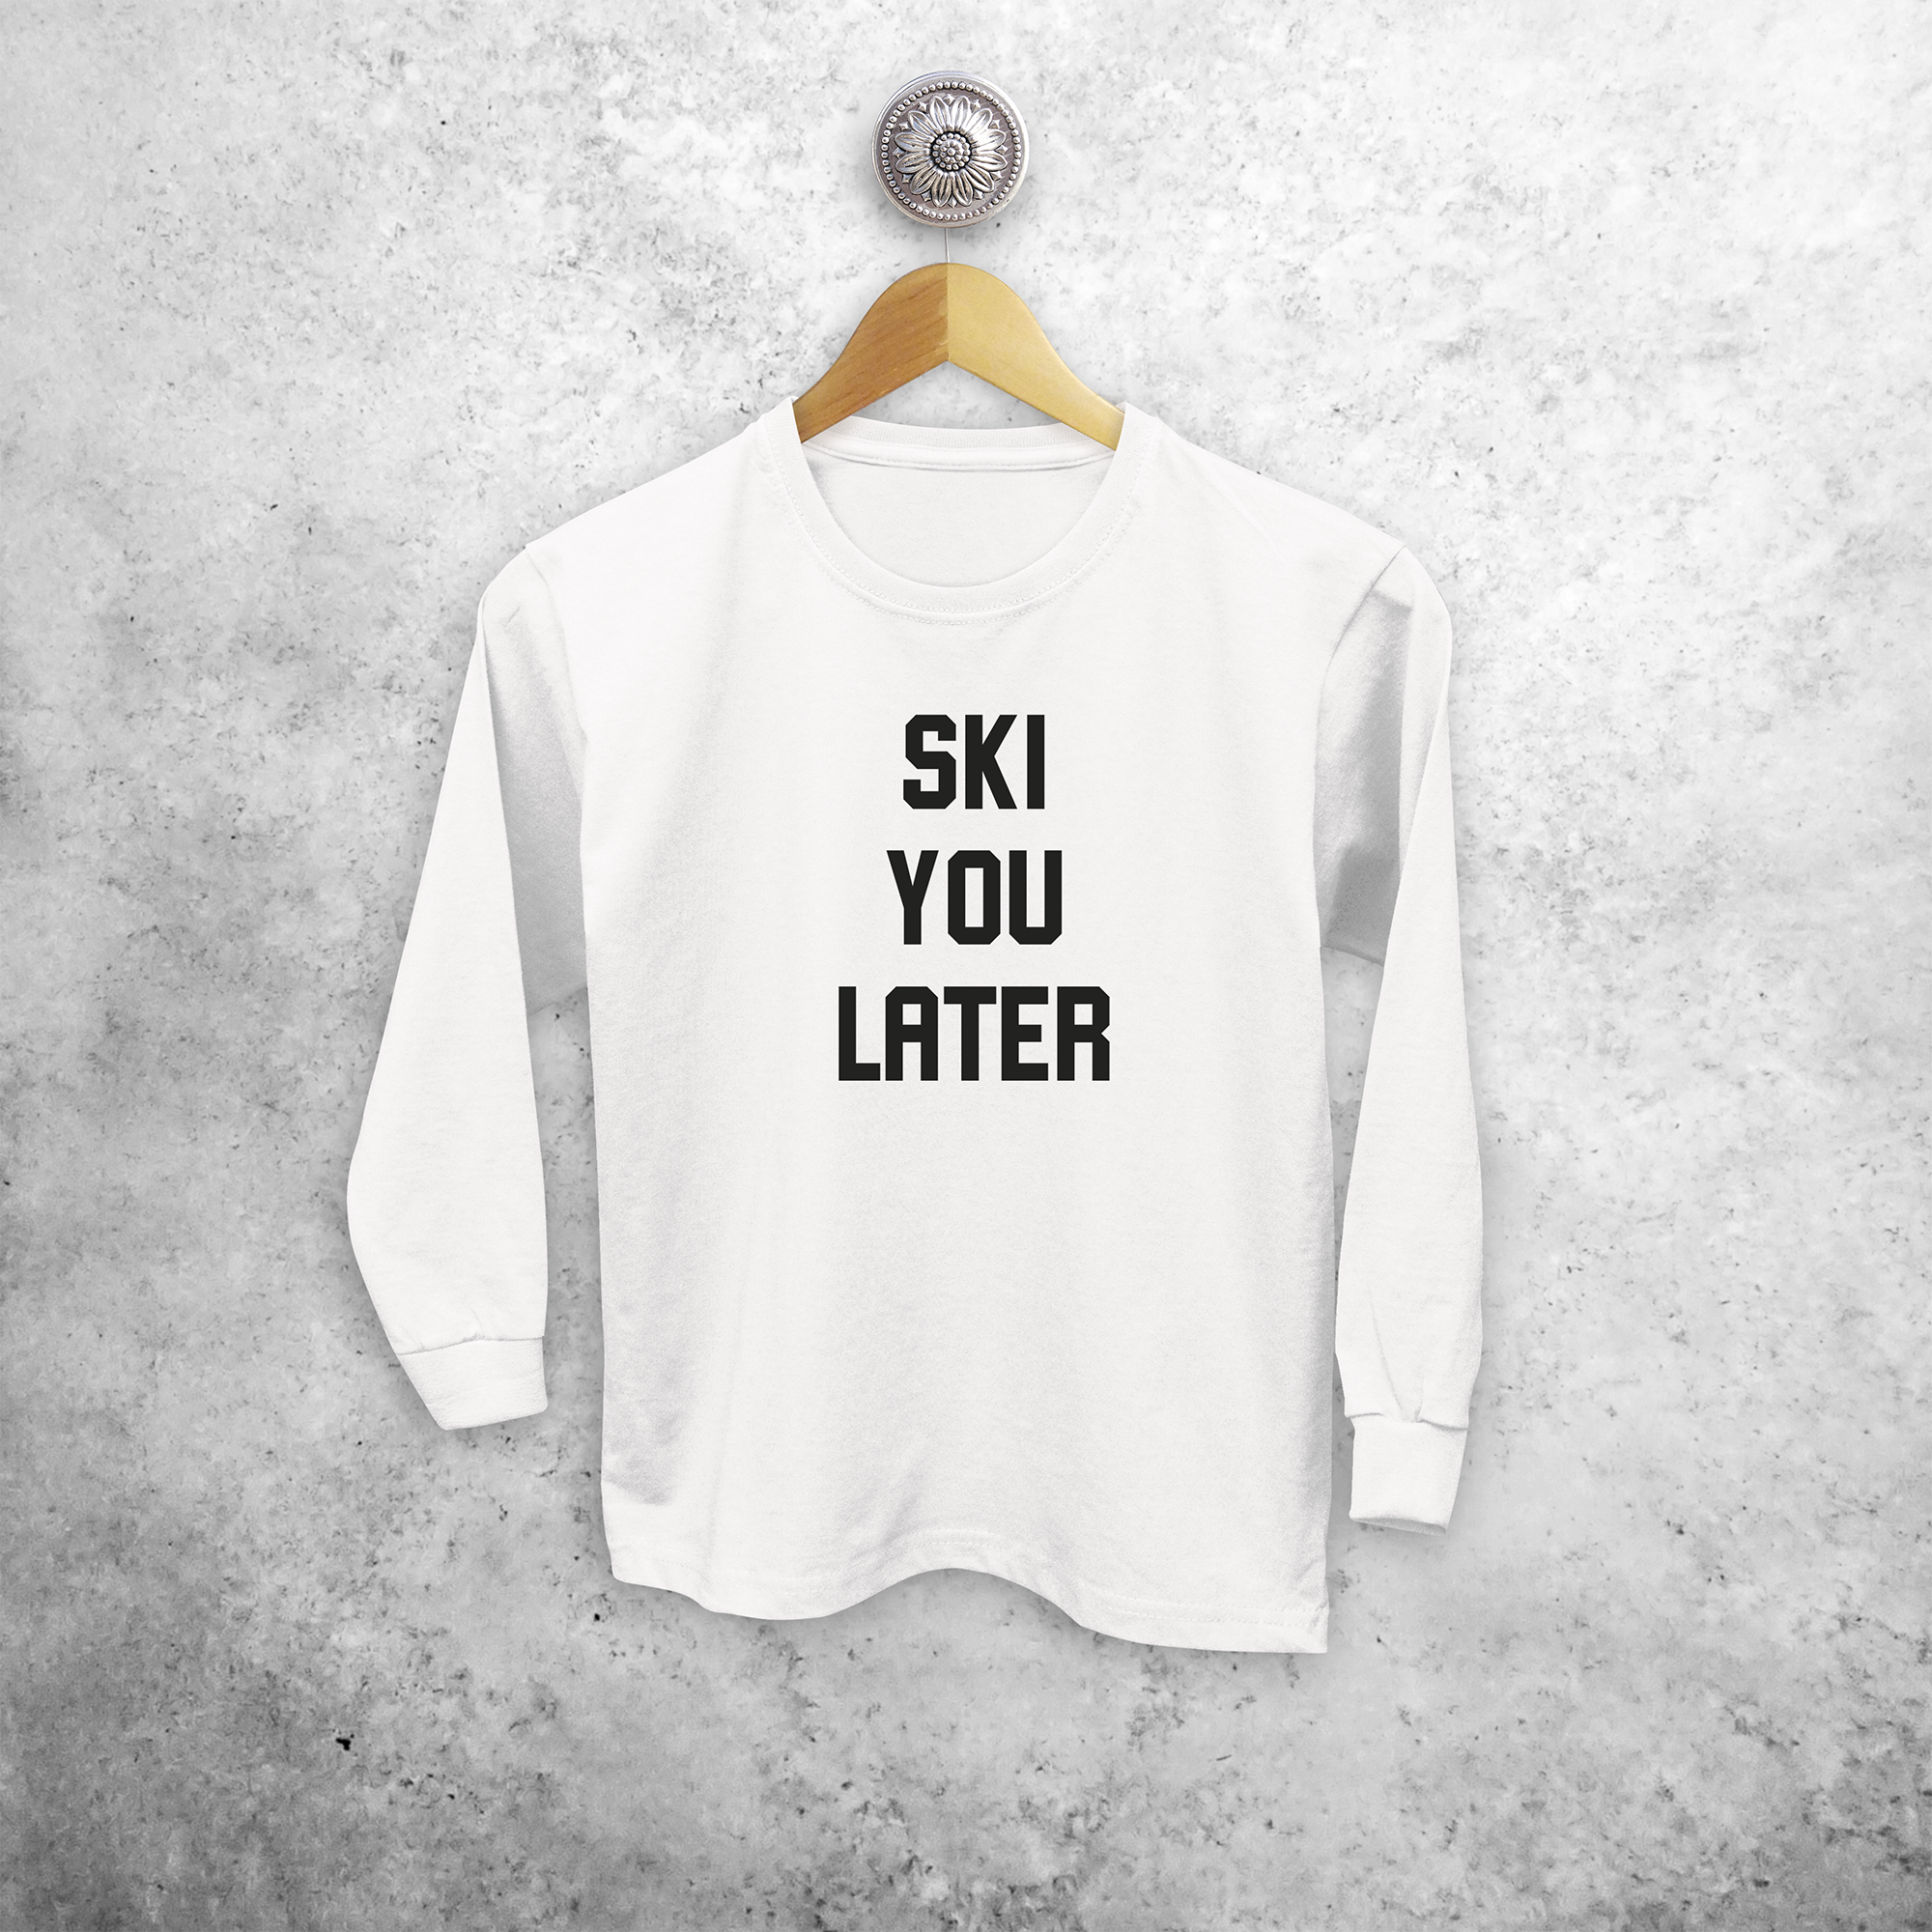 Kids shirt with long sleeves, with ‘Ski you later’ print by KMLeon.